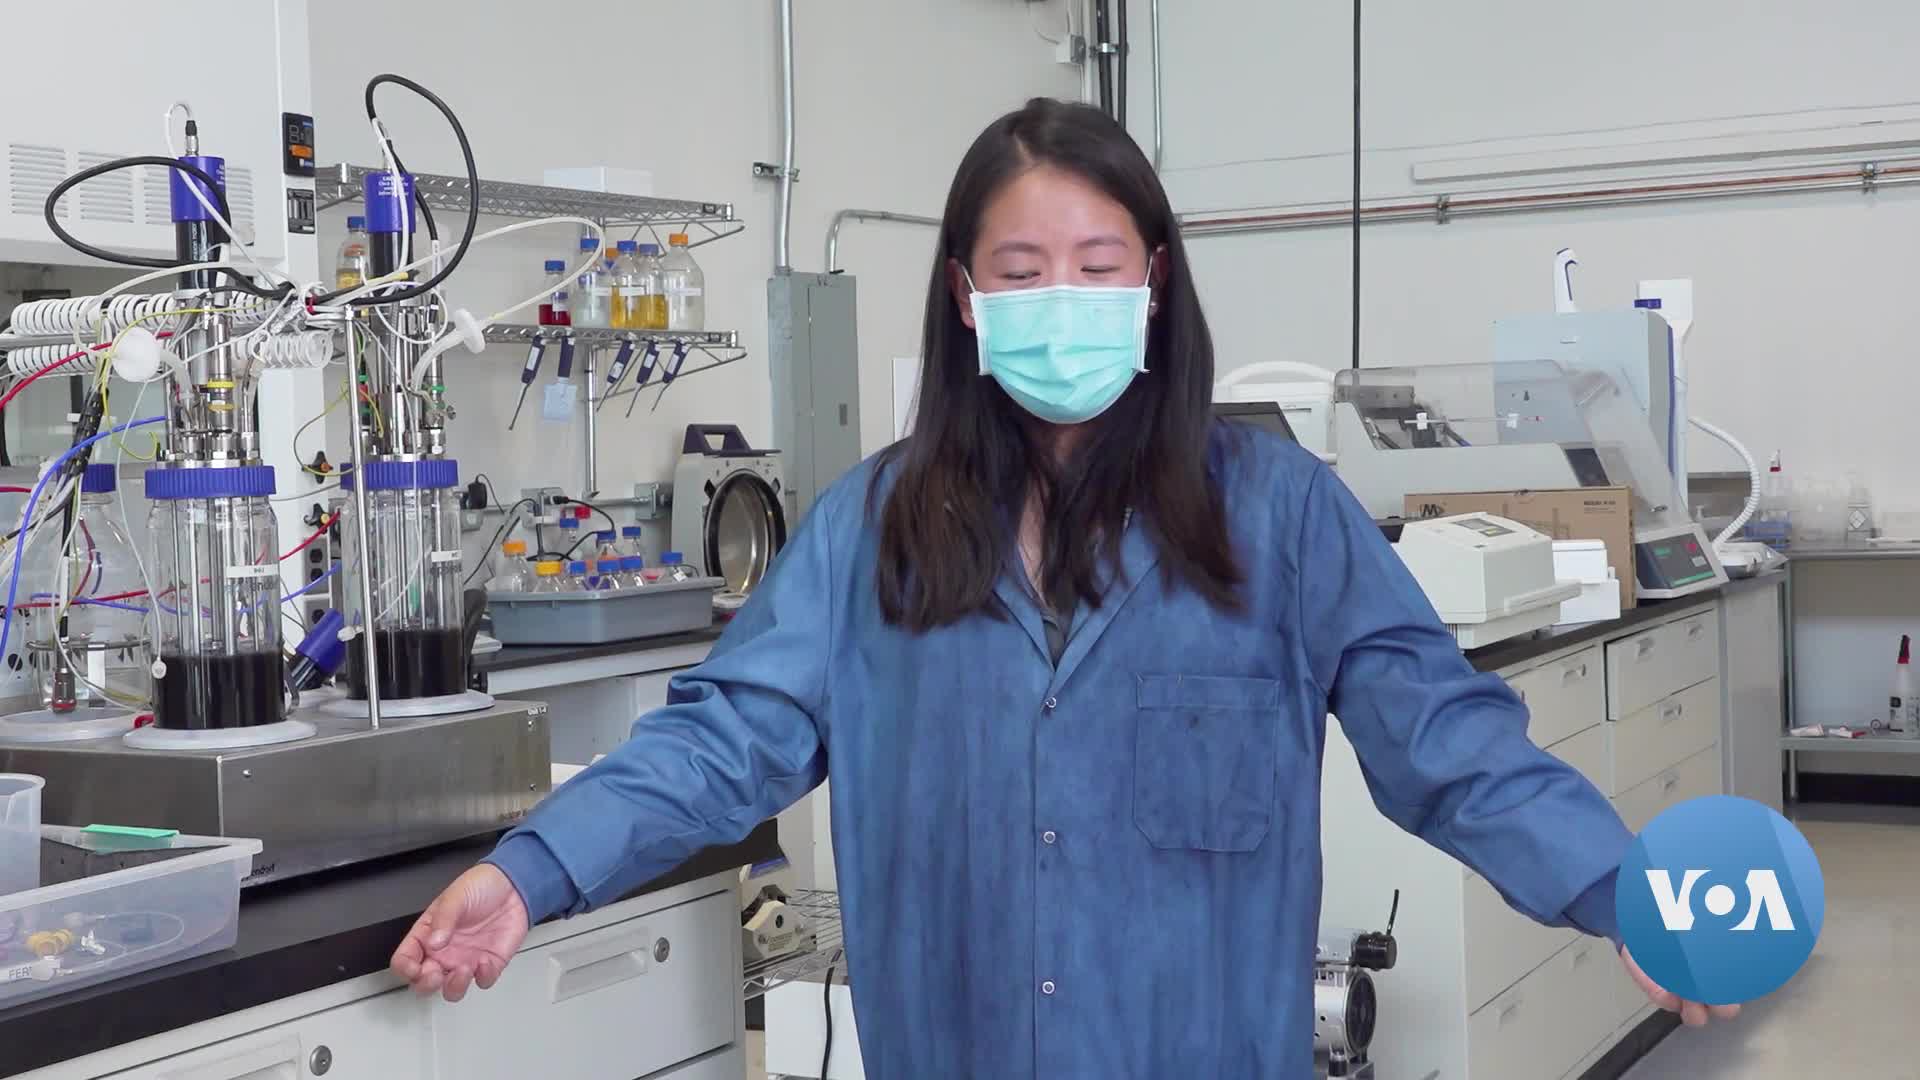 Scientists find eco-friendly way to dye blue jeans